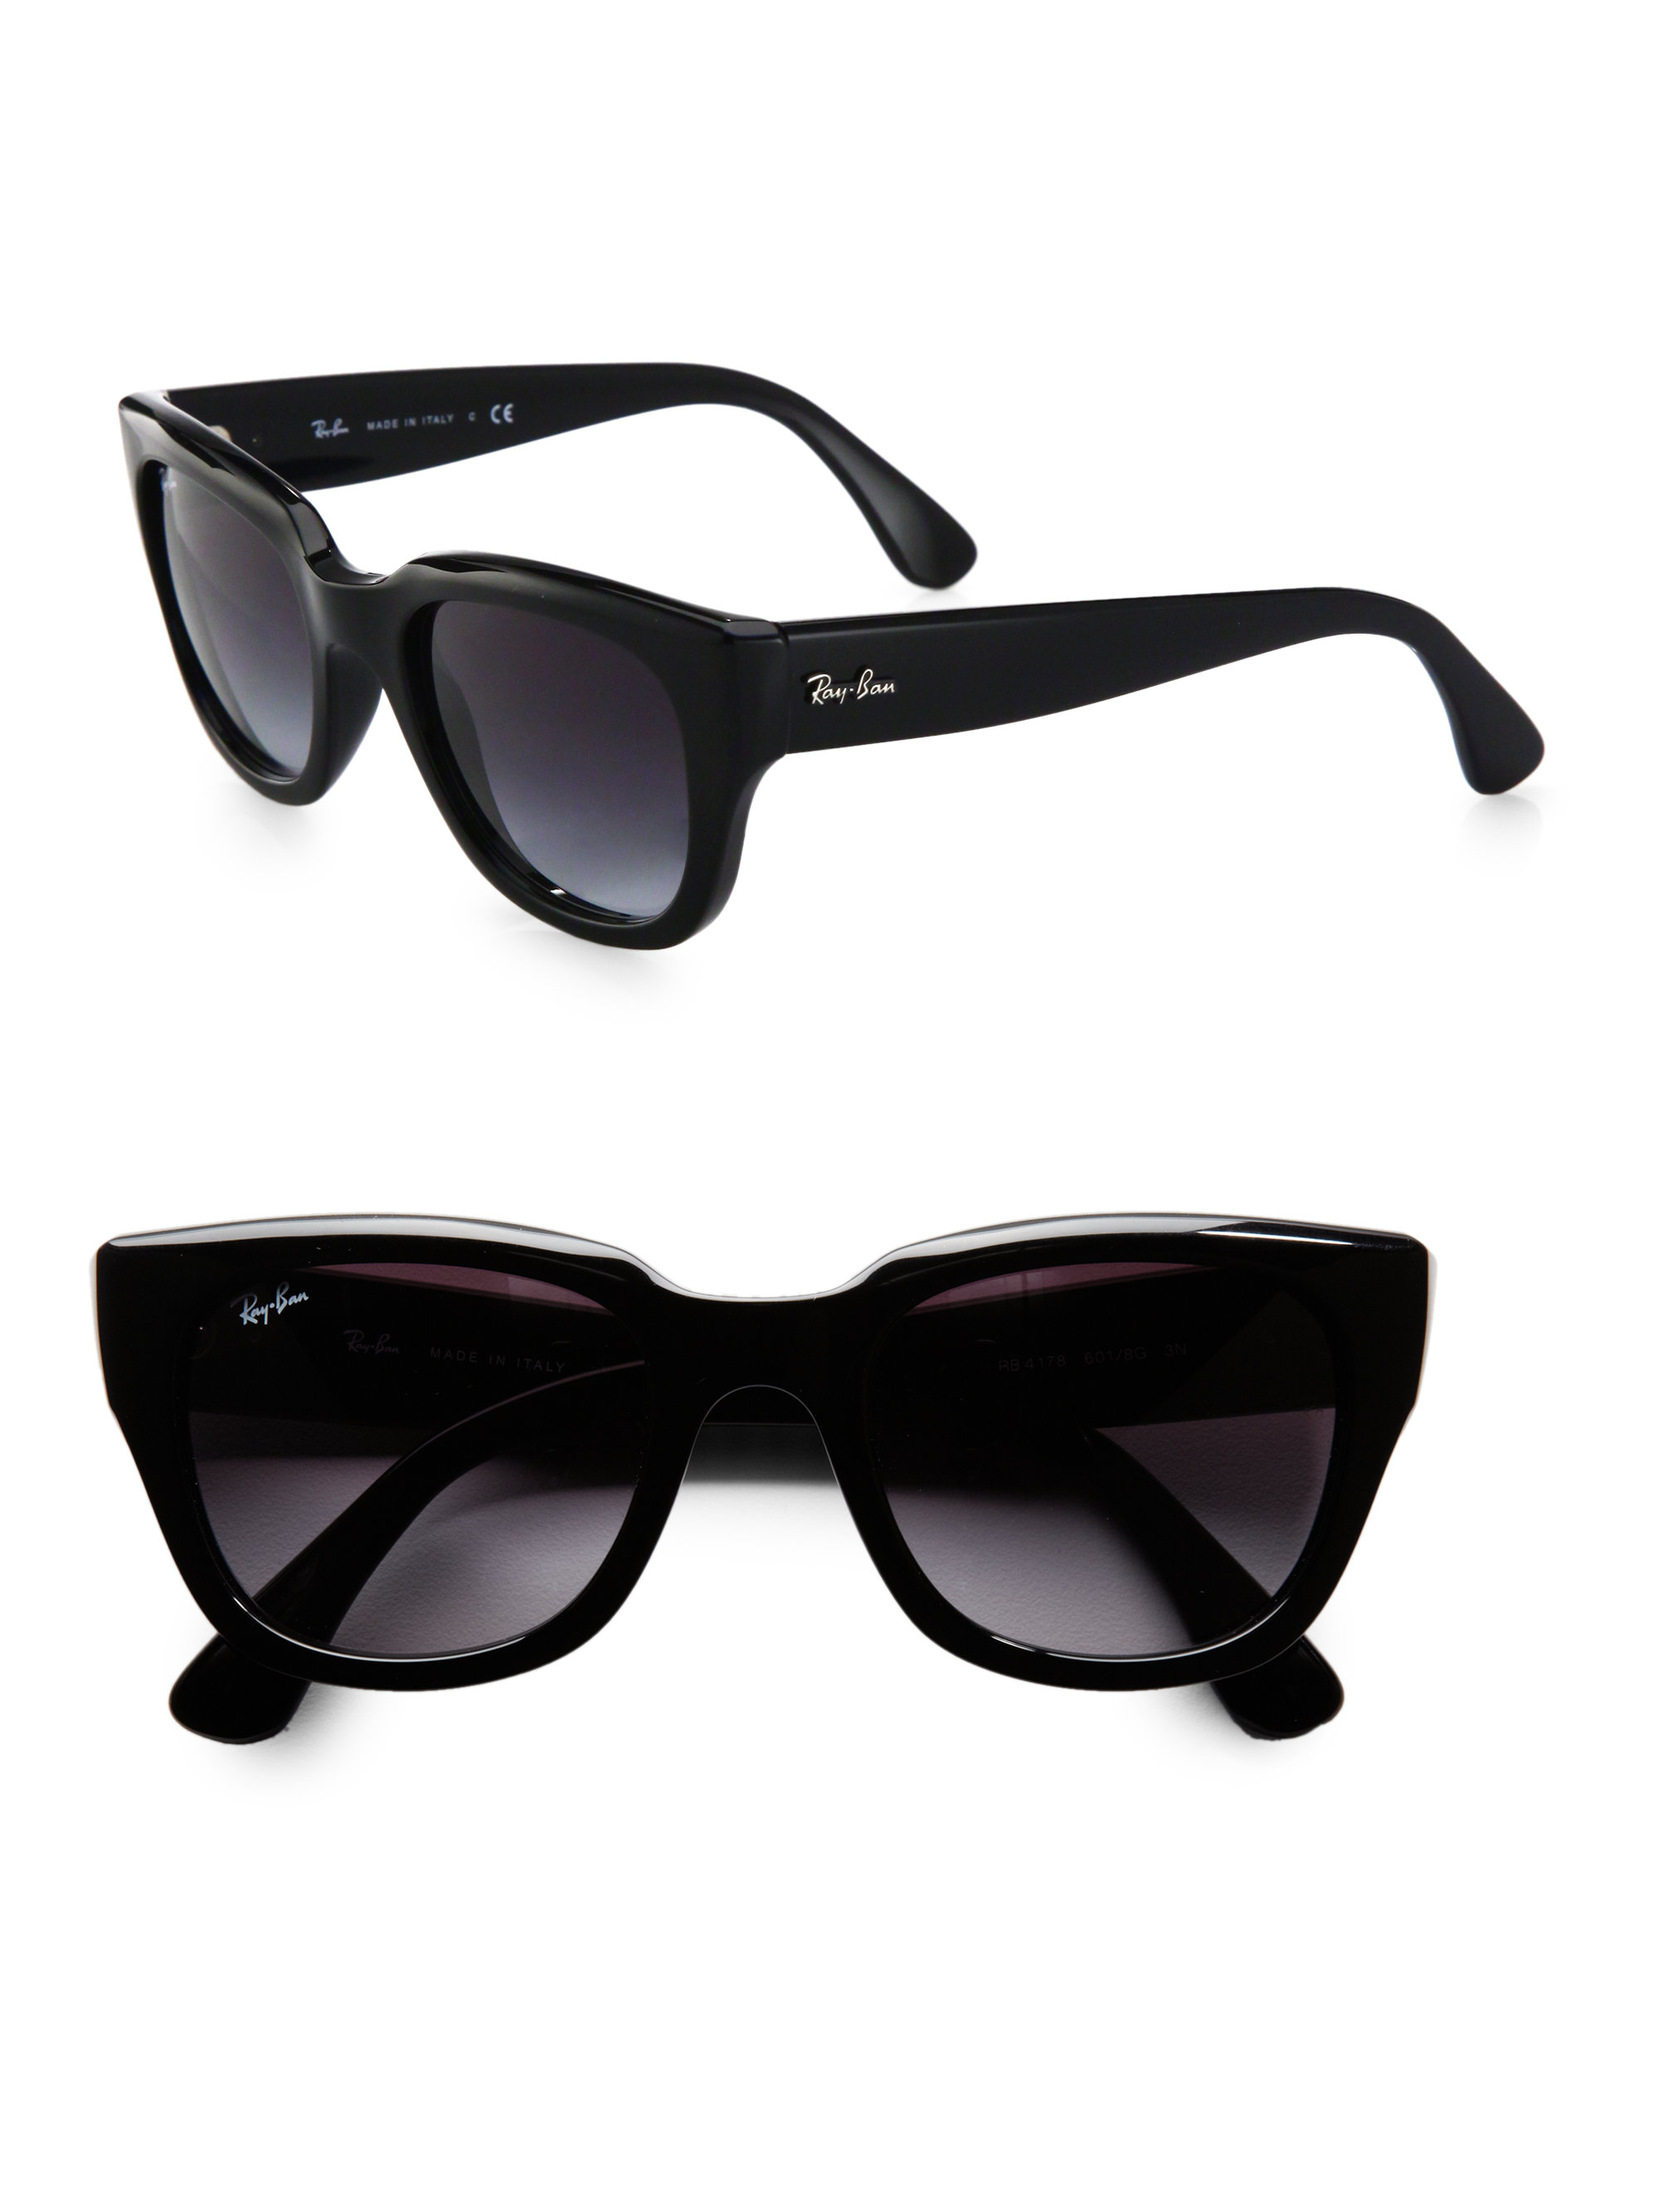 Ray-Ban Cats Eye Acetate Sunglasses in Black | Lyst